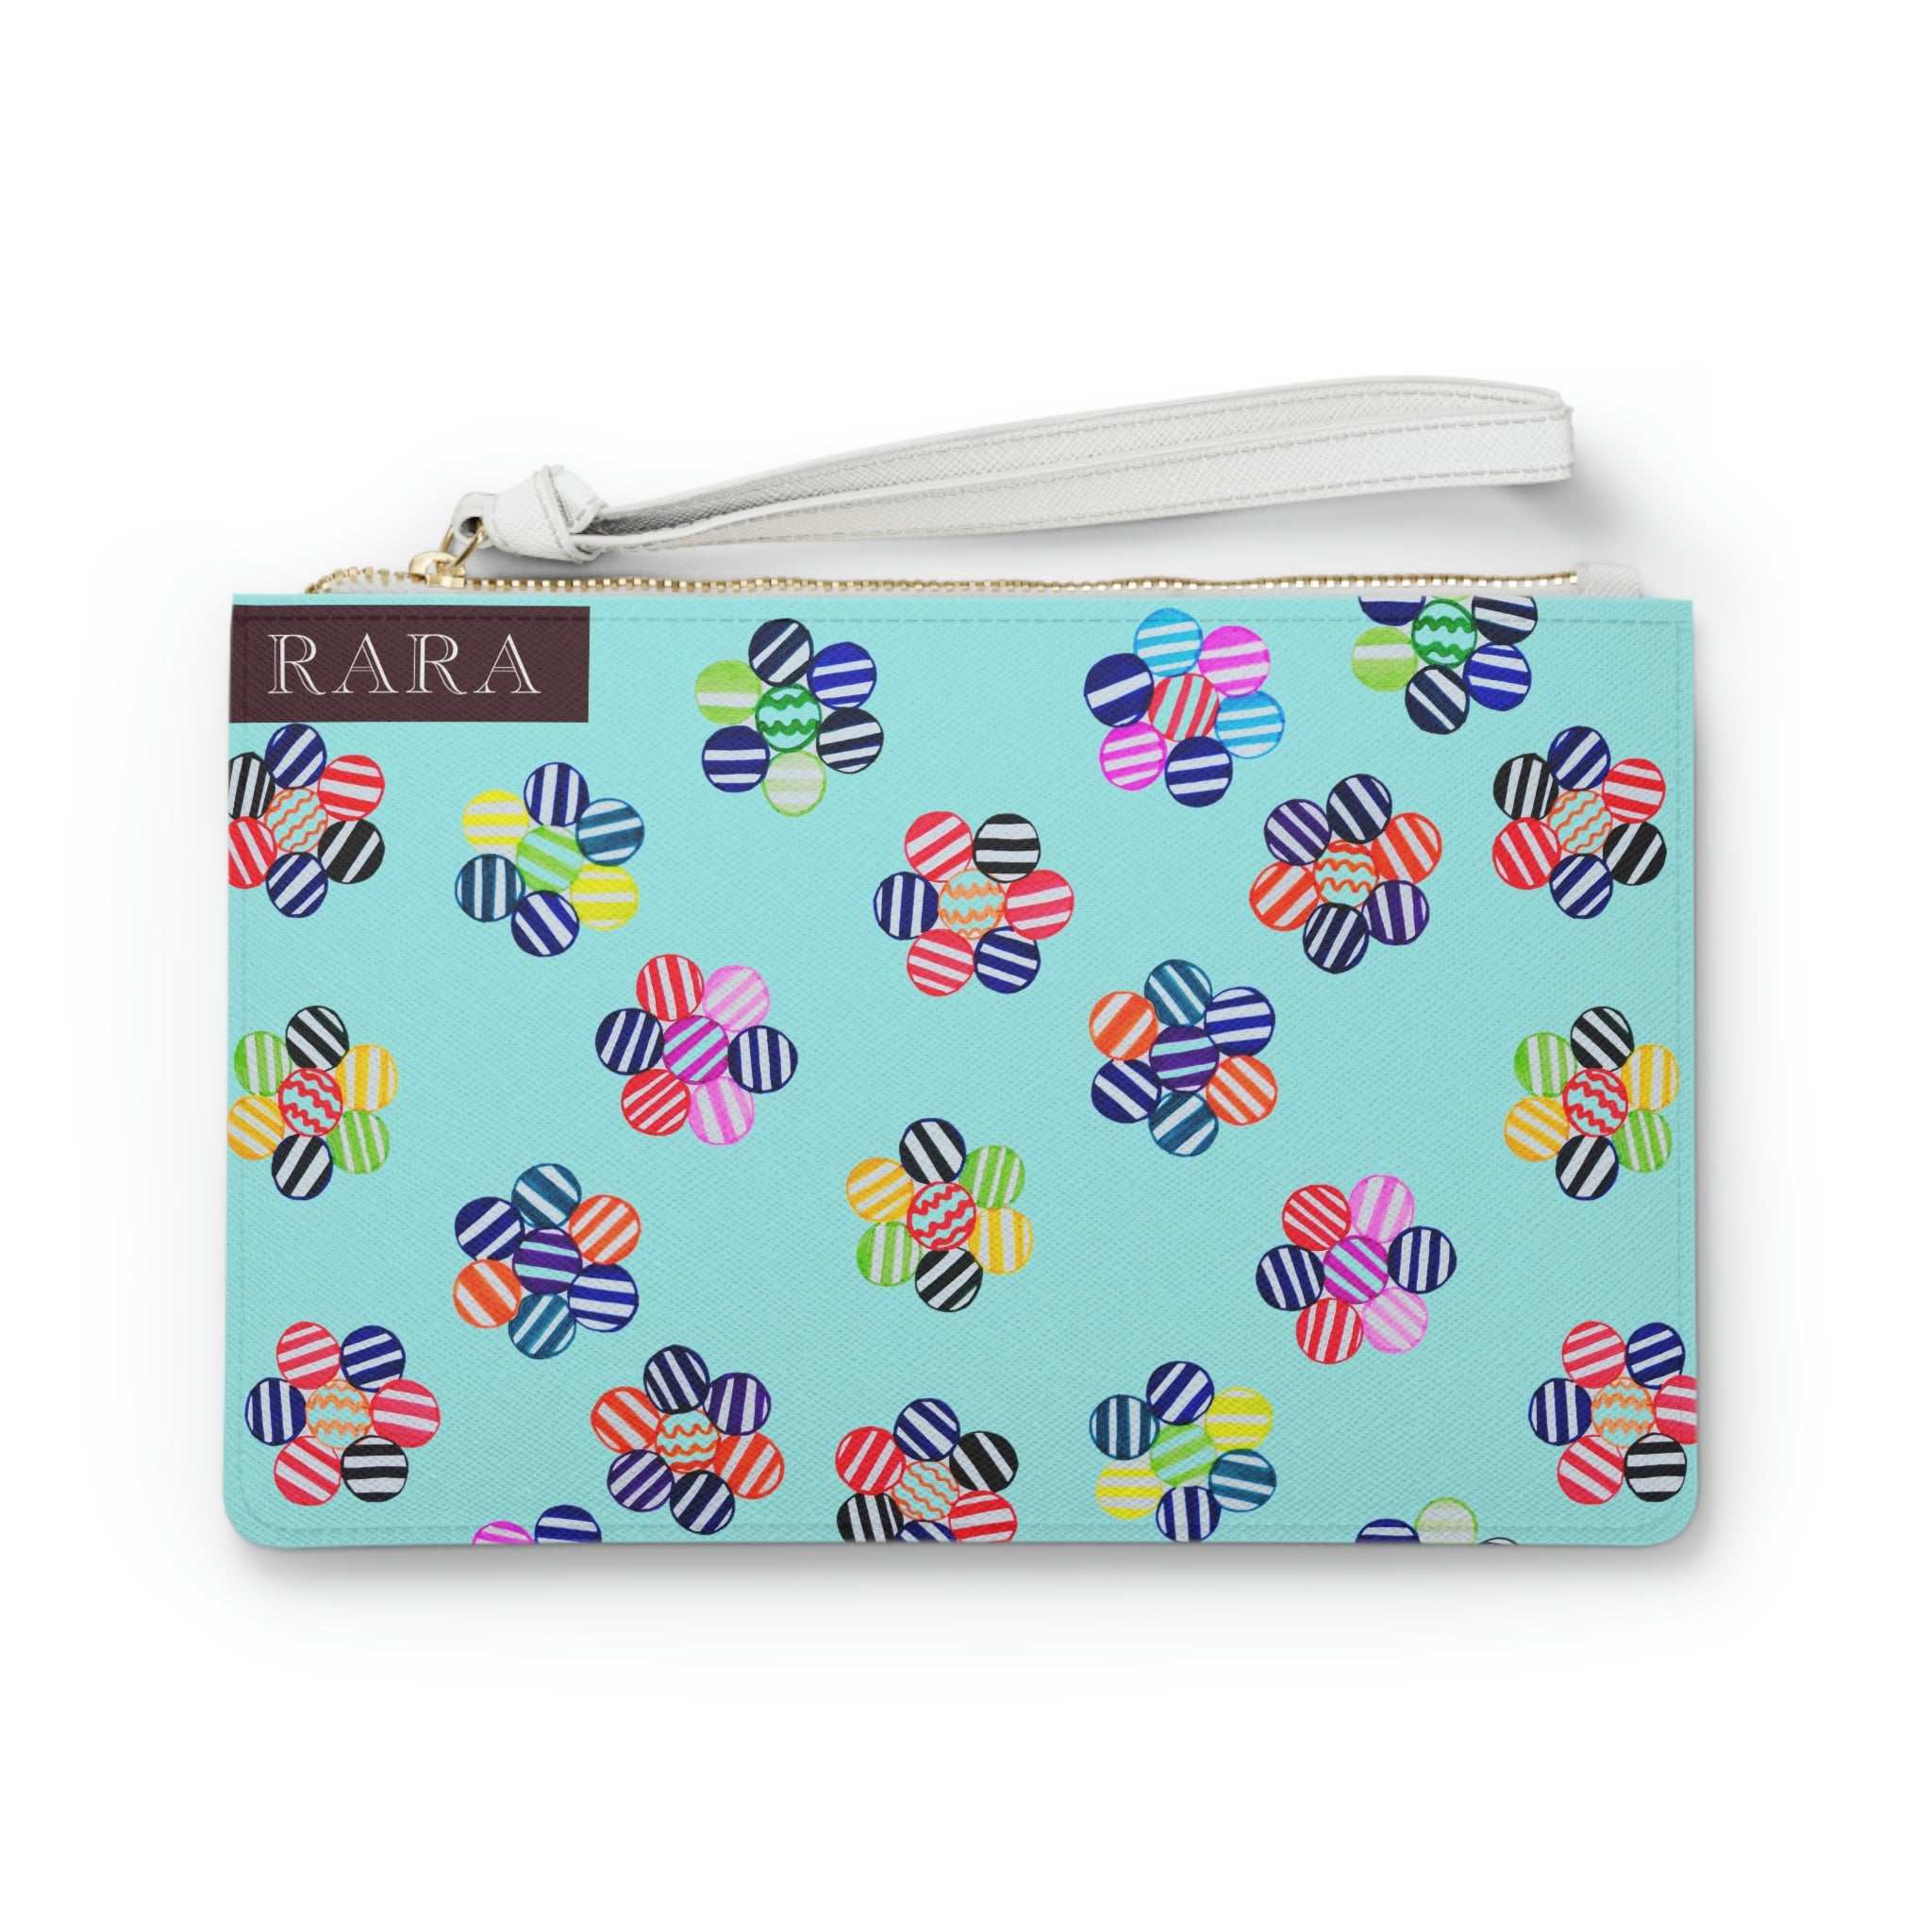 Icy Blue Candy Florals Clutch Bag